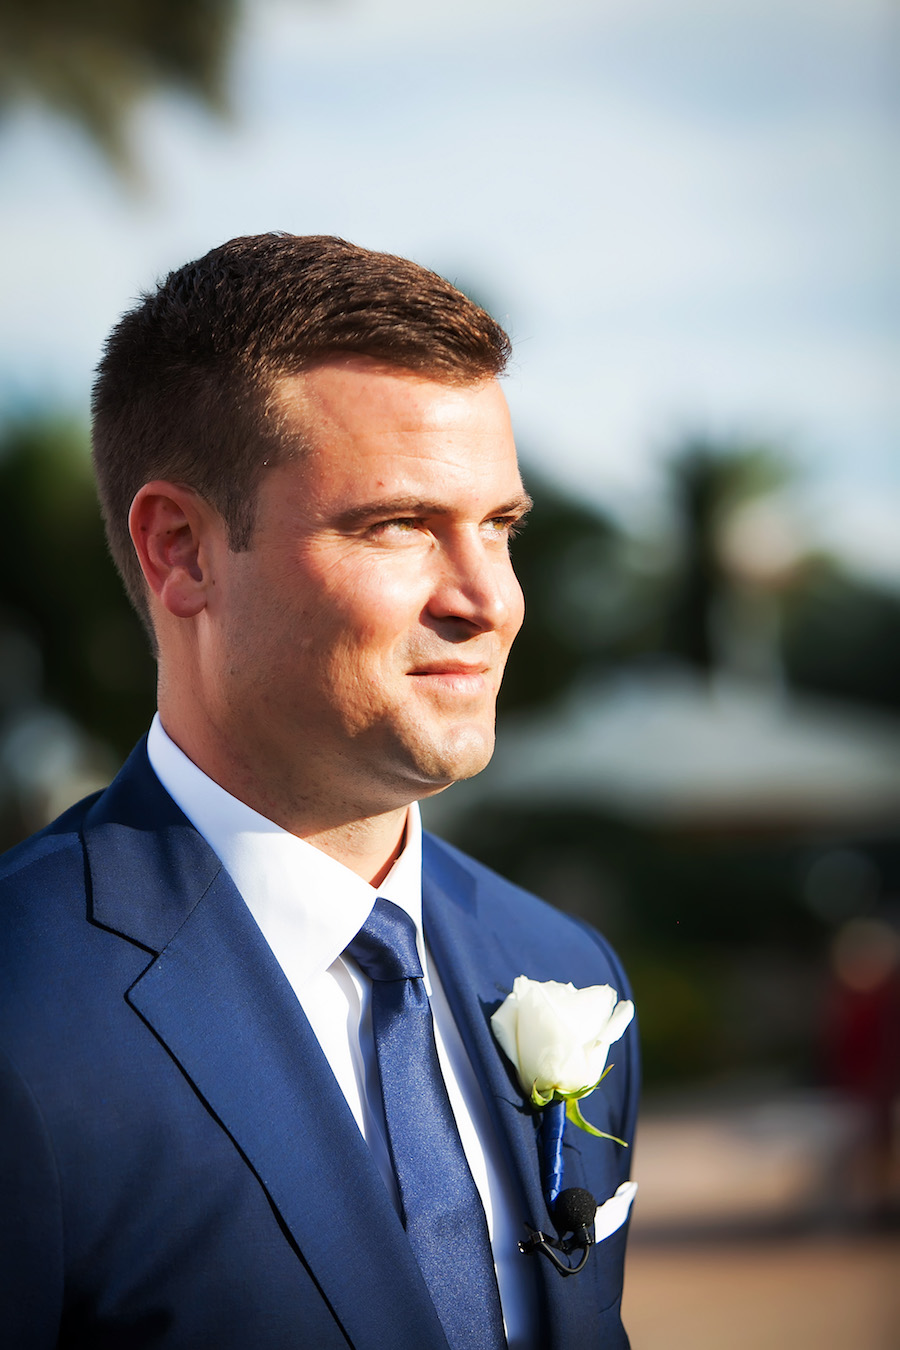 Groom in Navy Blue Suit Outdoor Wedding Day Portrait | St. Pete Wedding Photographer Limelight Photography